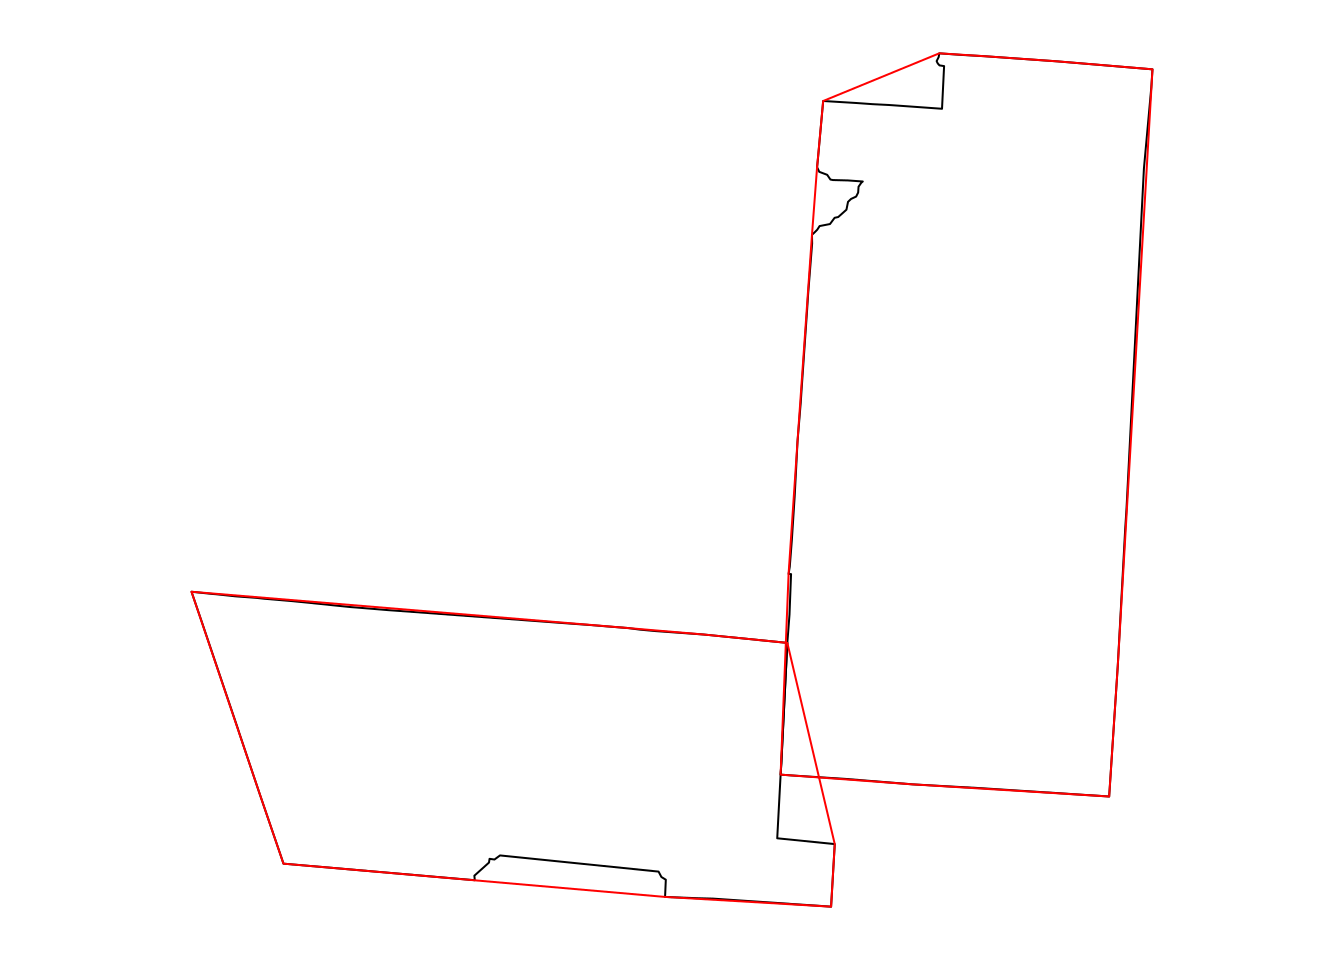 Convex hull polygons for two counties in New Mexico